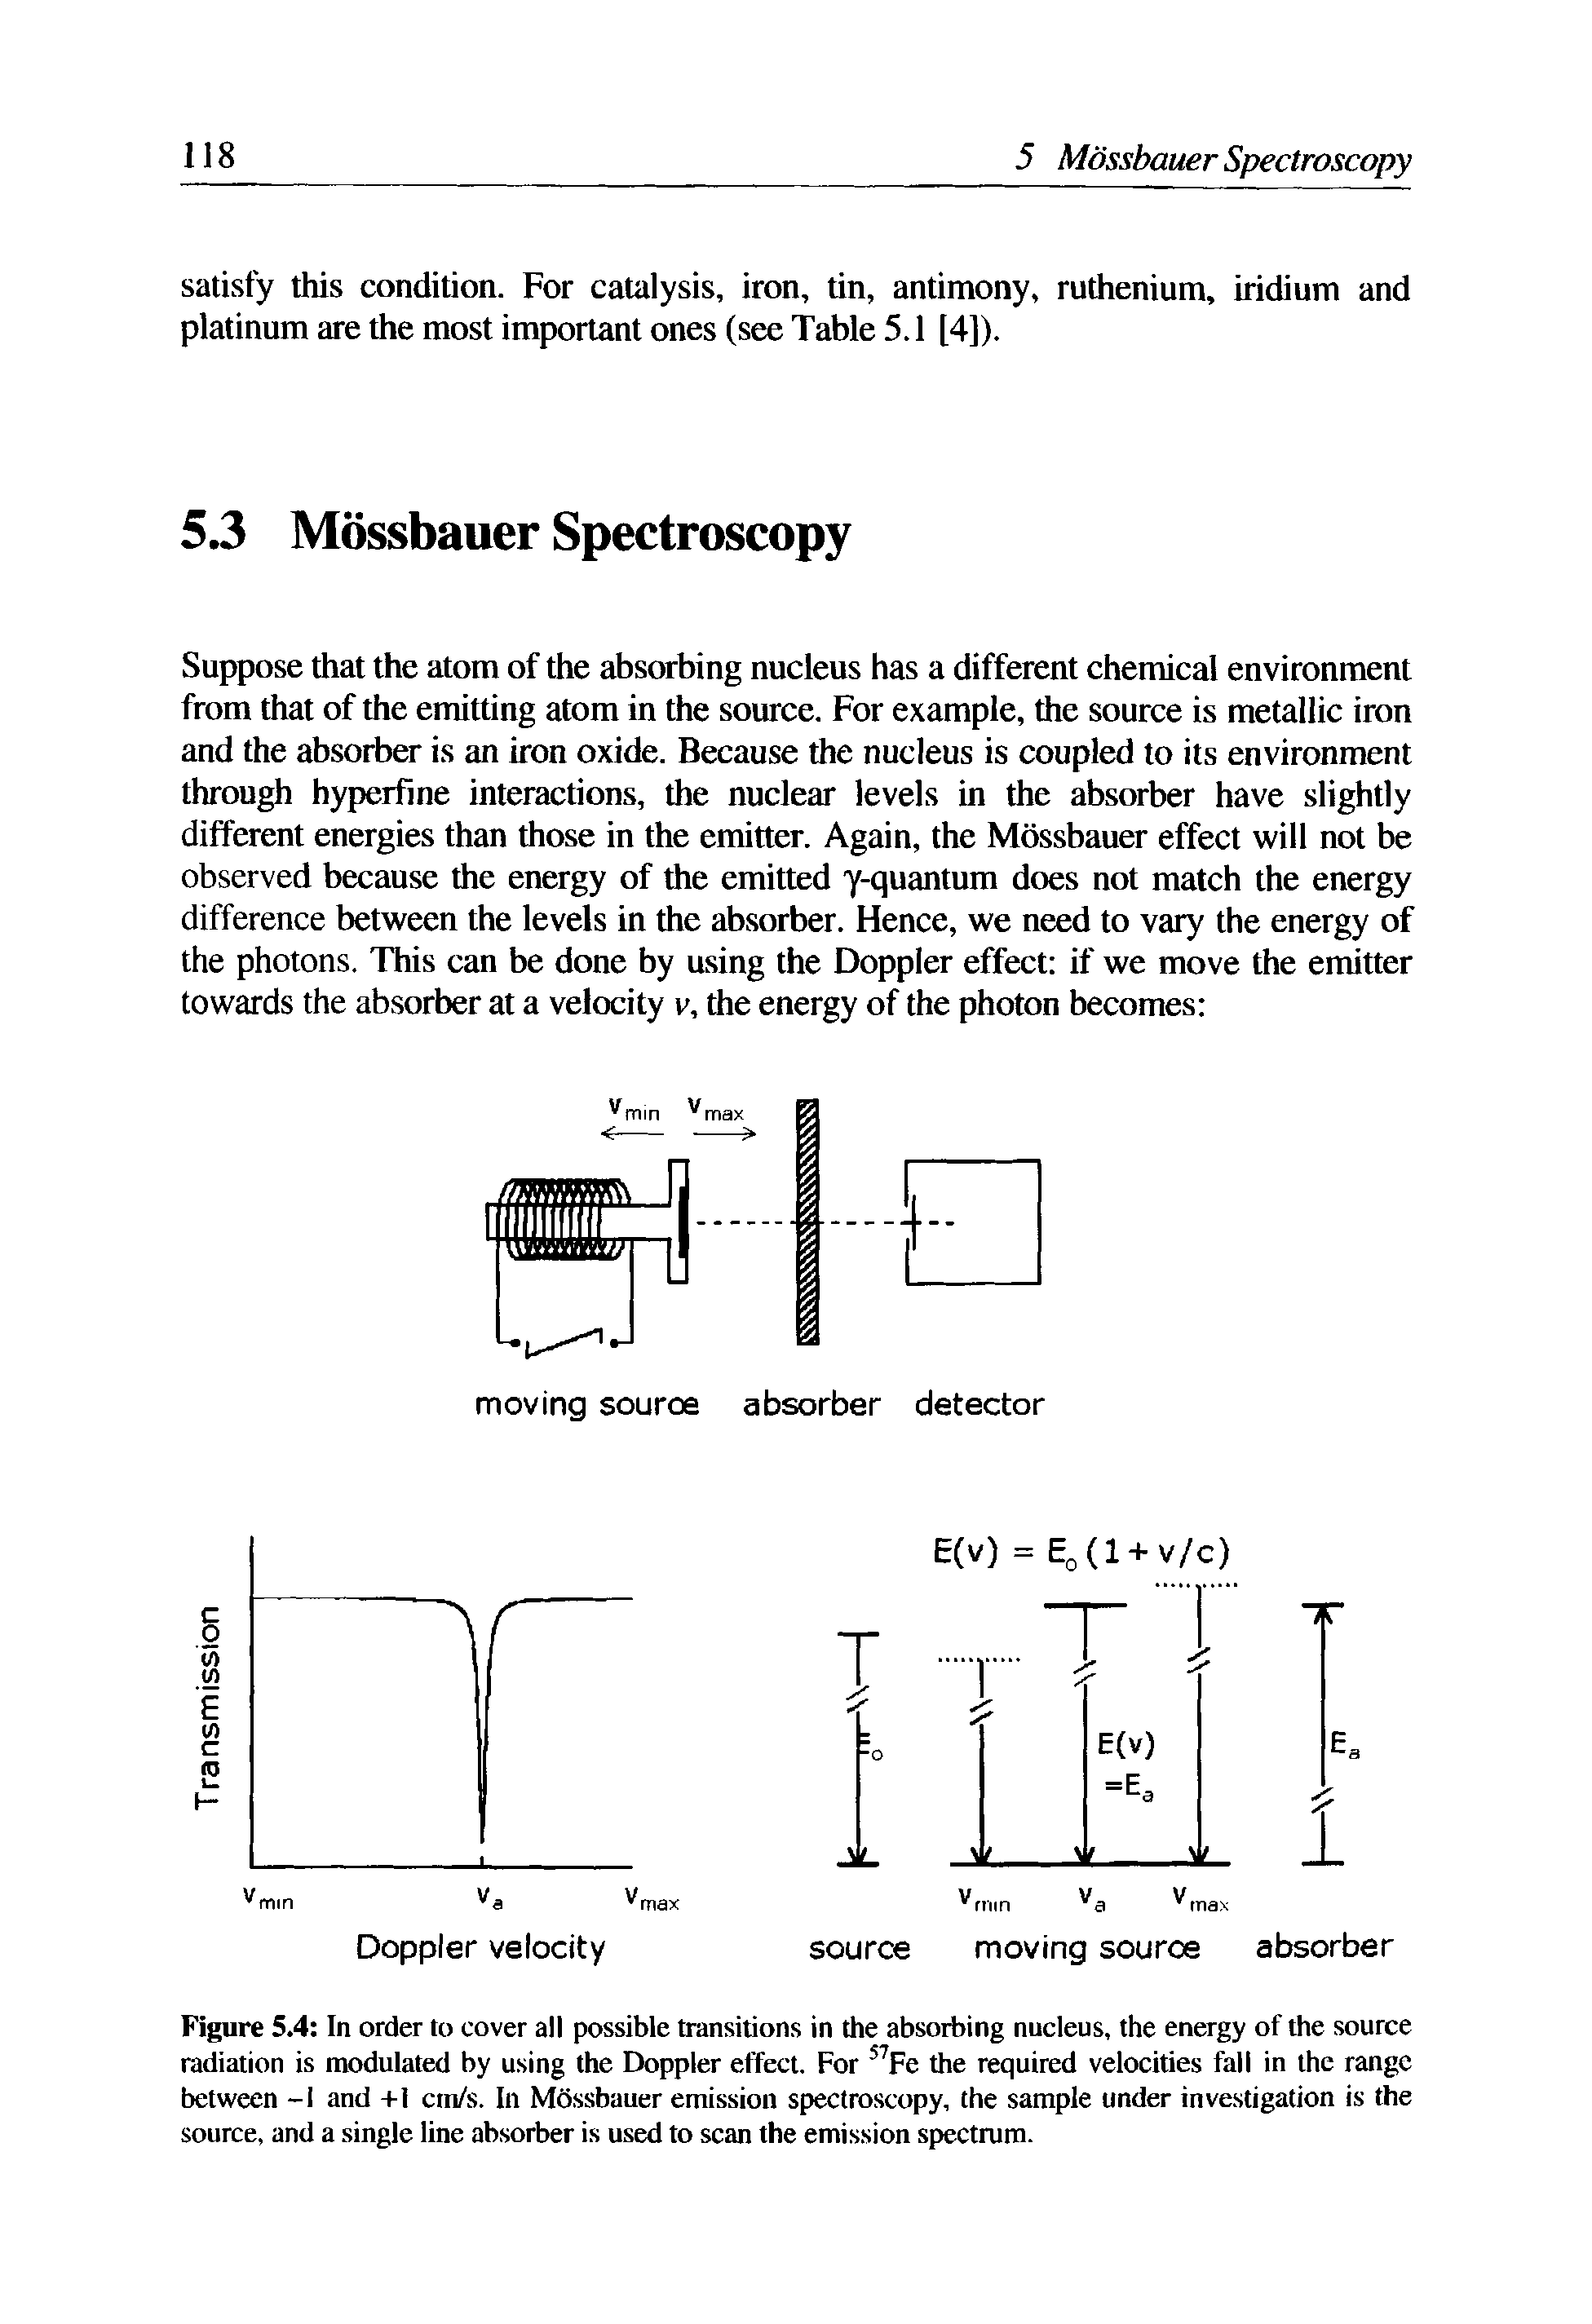 Figure 5.4 In order to cover all possible transitions in the absorbing nucleus, the energy of the source radiation is modulated by using the Doppler effect. For 57Fe the required velocities fall in the range between -I and +1 ctn/s. In Mfissbauer emission spectroscopy, the sample under investigation is the source, and a single line absorber is used to scan the emission spectrum.